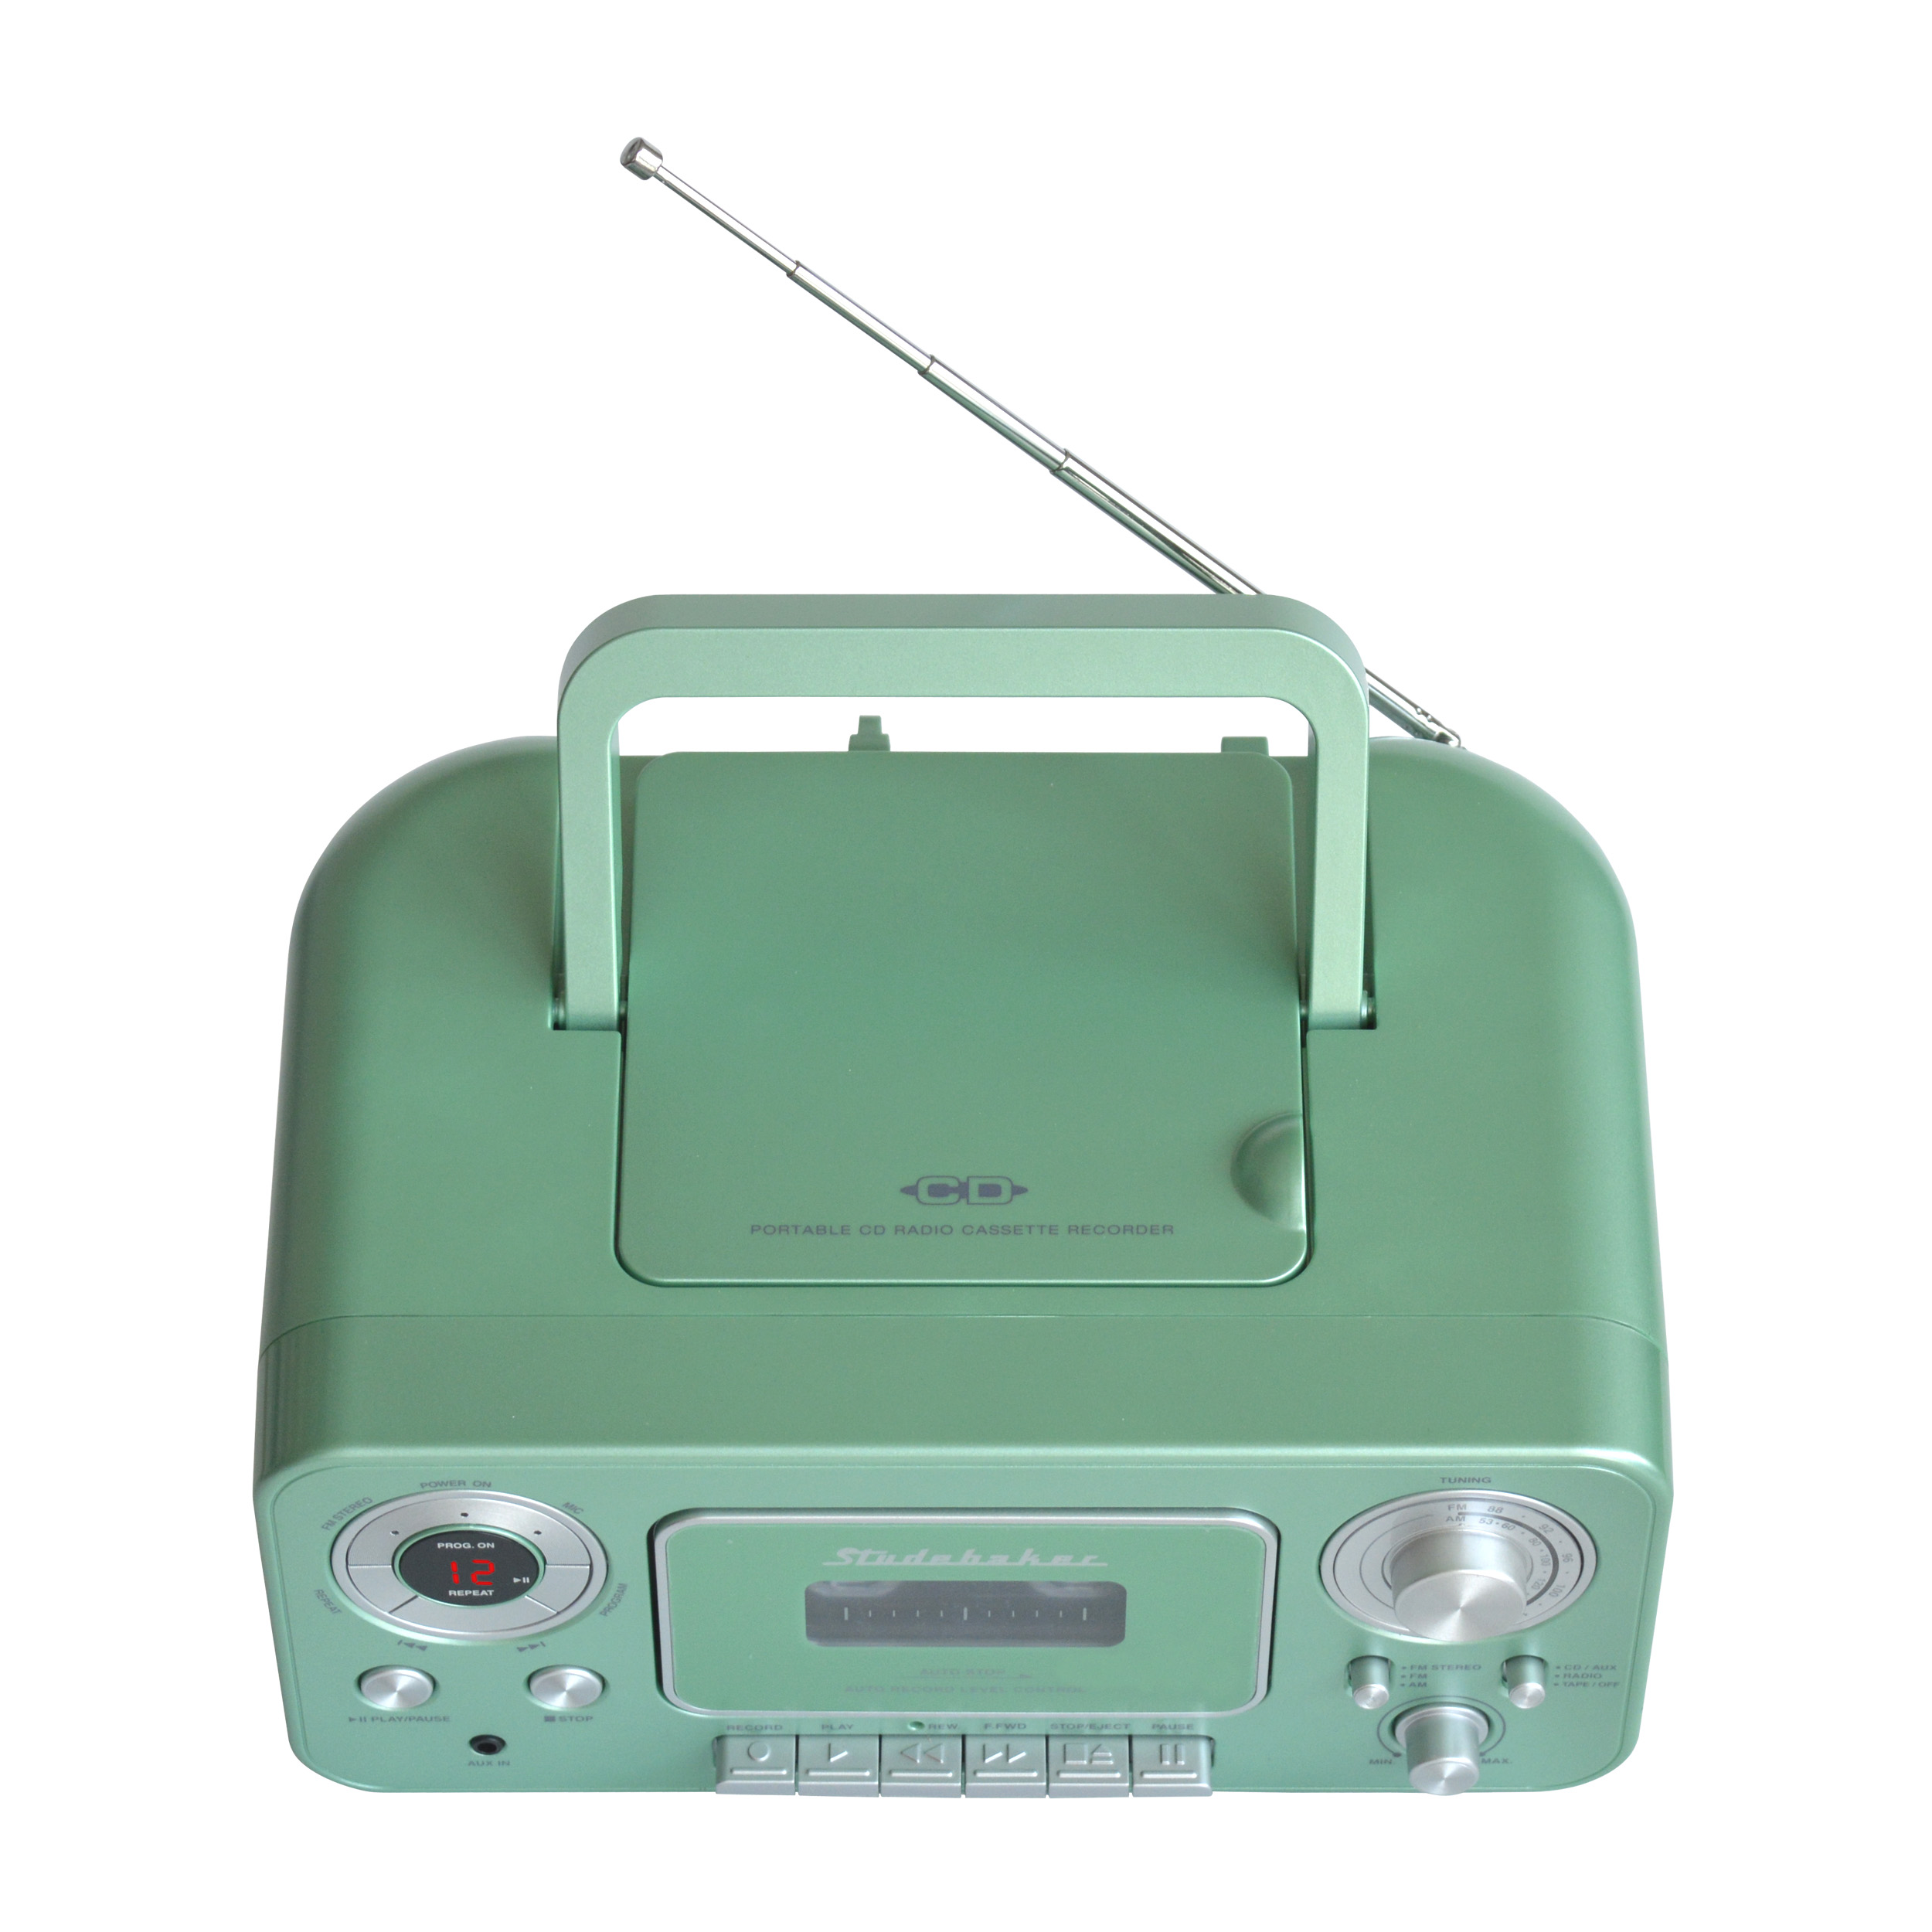 Portable Stereo CD Player with AM/FM Radio and Cassette Player/Recorder - image 5 of 5